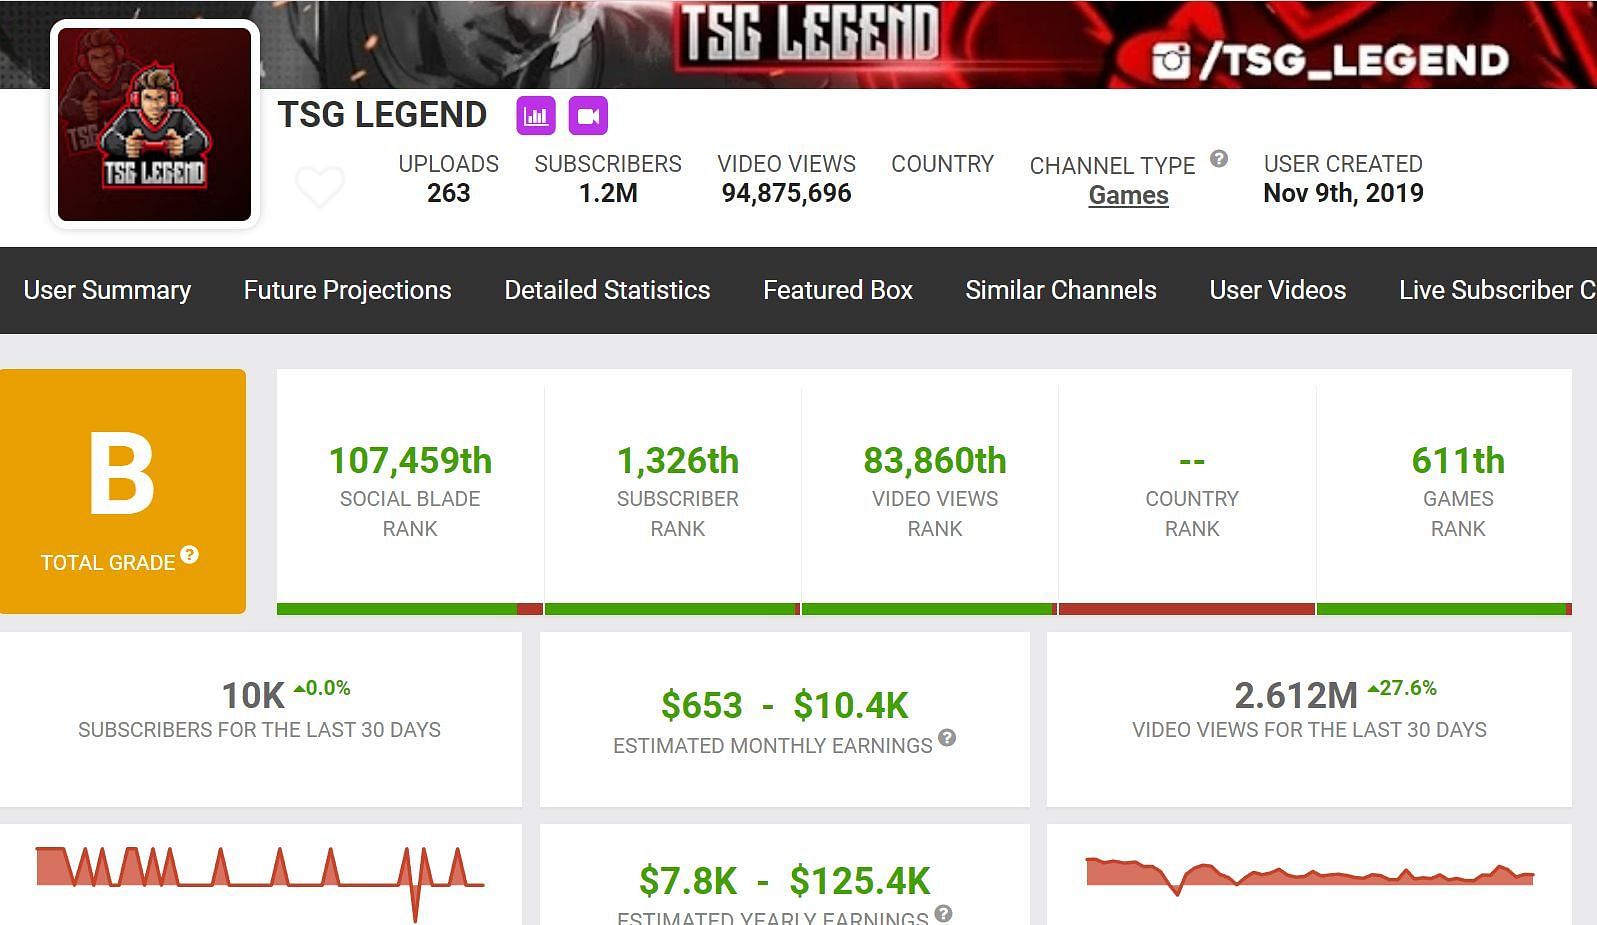 TSG Legend has posted 2.612 million views in the last 30 days (Image via Social Blade)